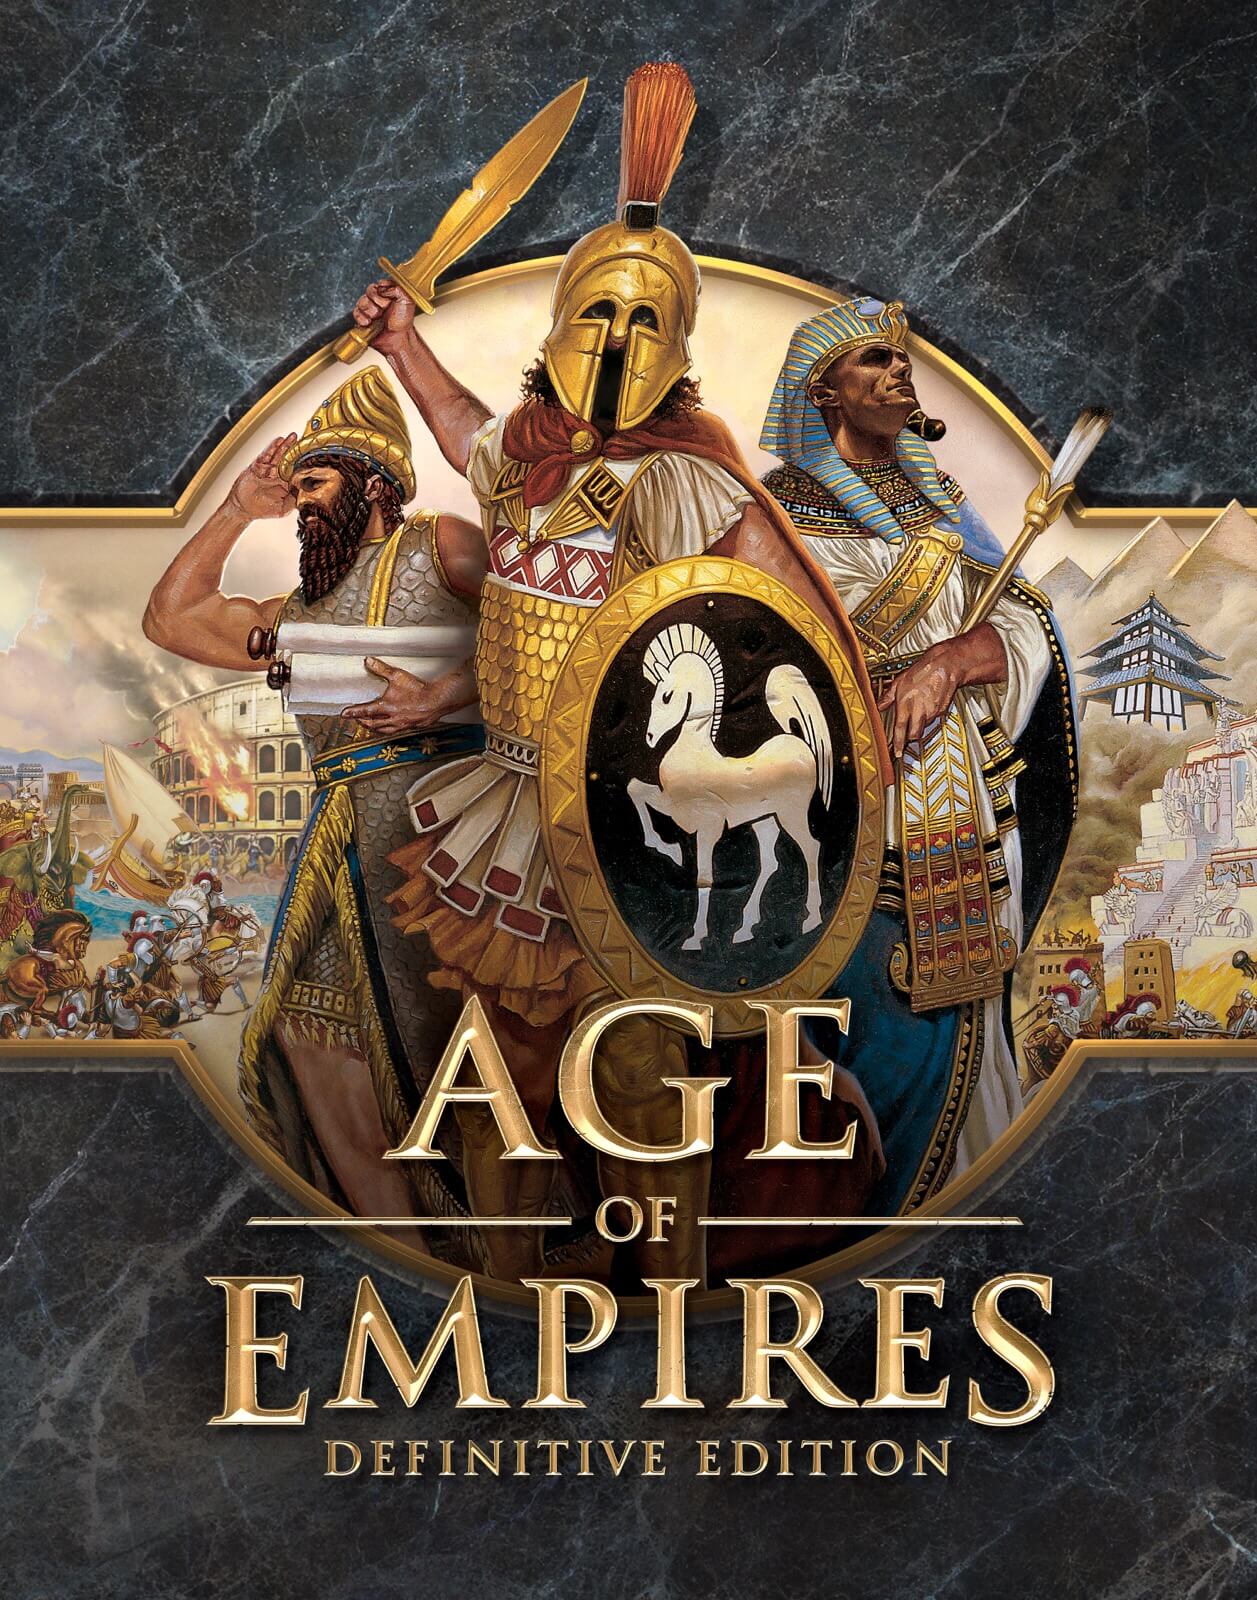 Age of Empires Definitive Edition - PC